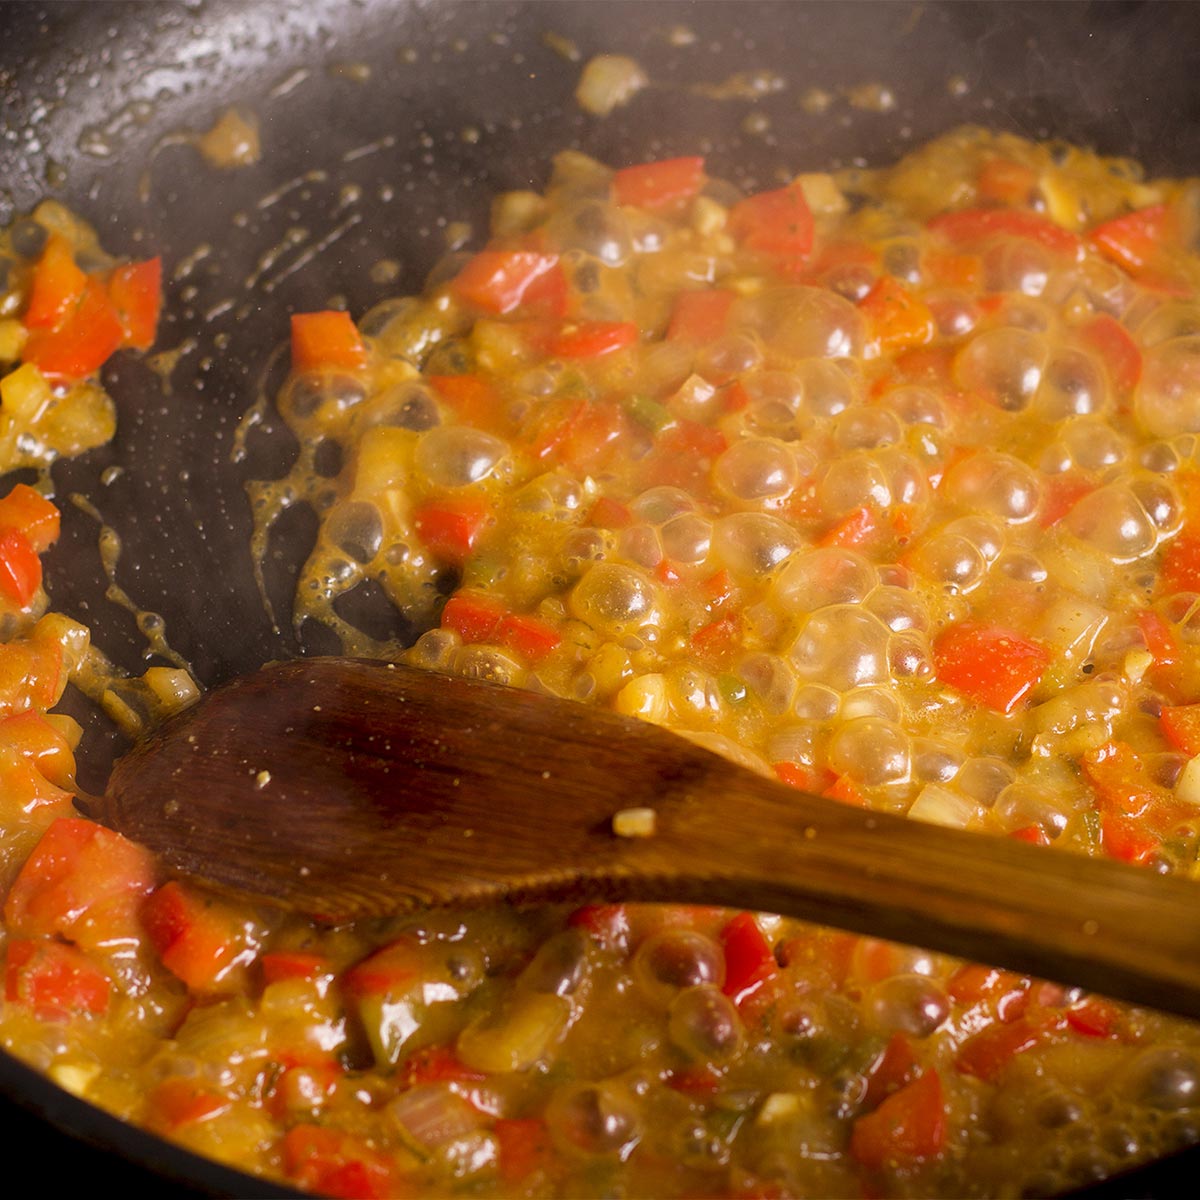 Pour chicken stock into the skillet with the vegetables and let it cook while stirring.